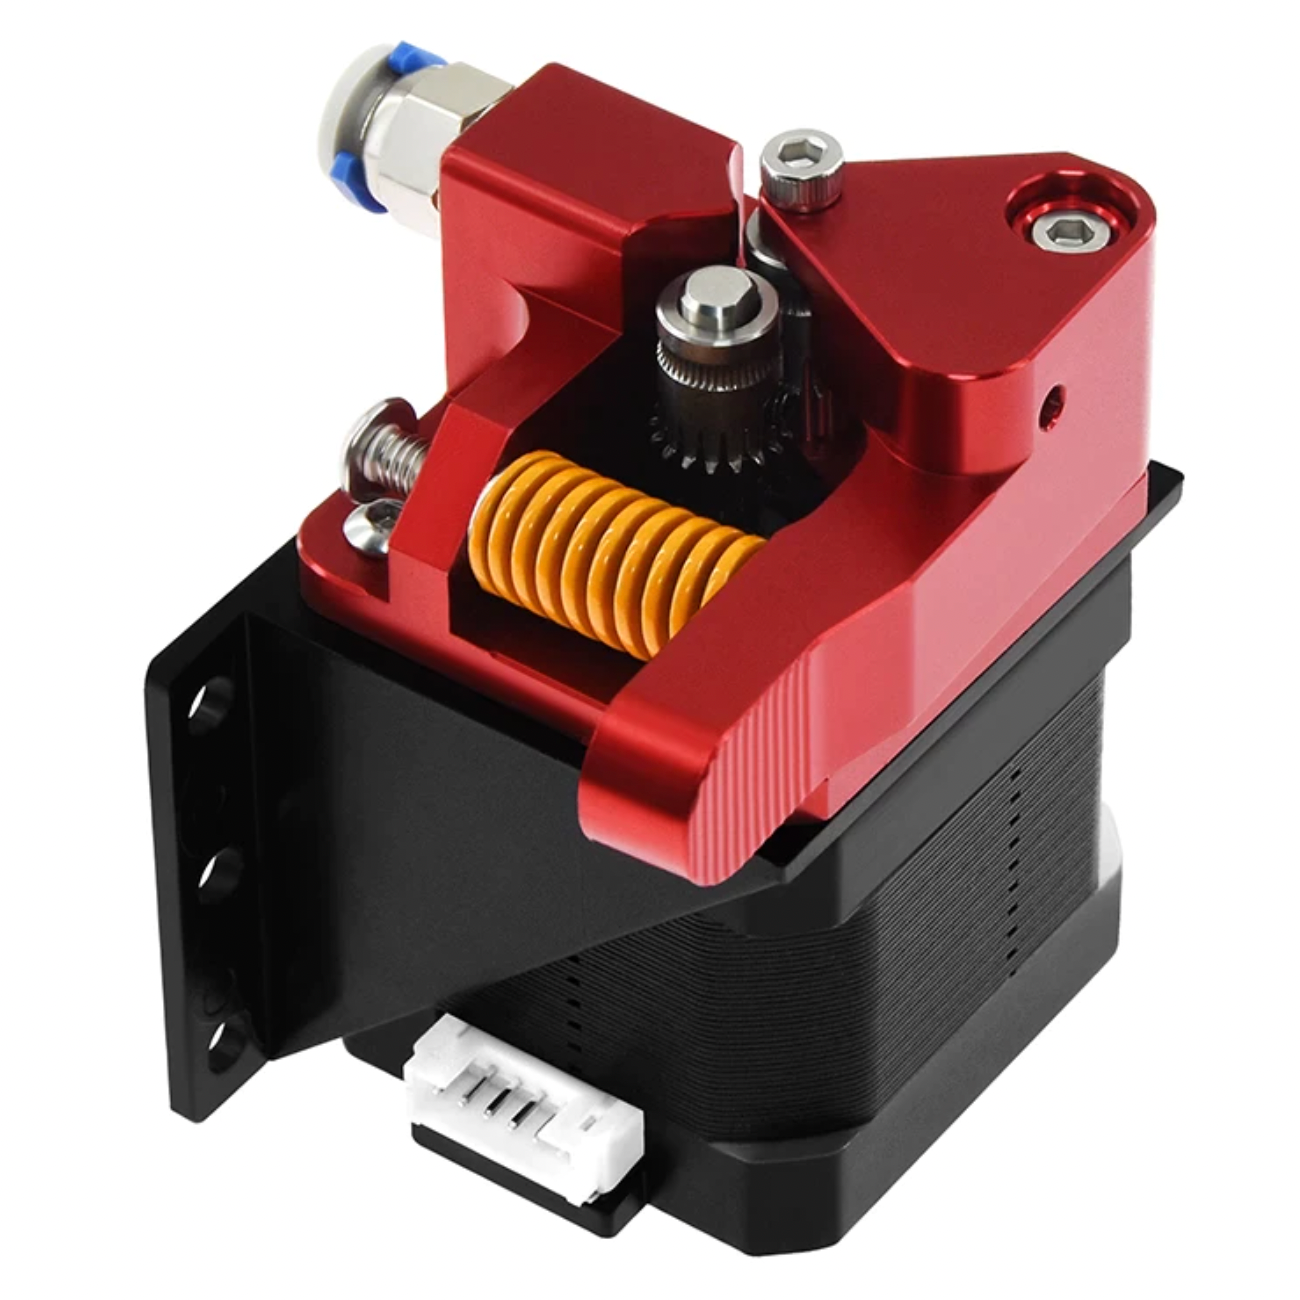  Dual Gear Drive Extruder Upgrade for Creality Ender 3, Ender 5 & CR10